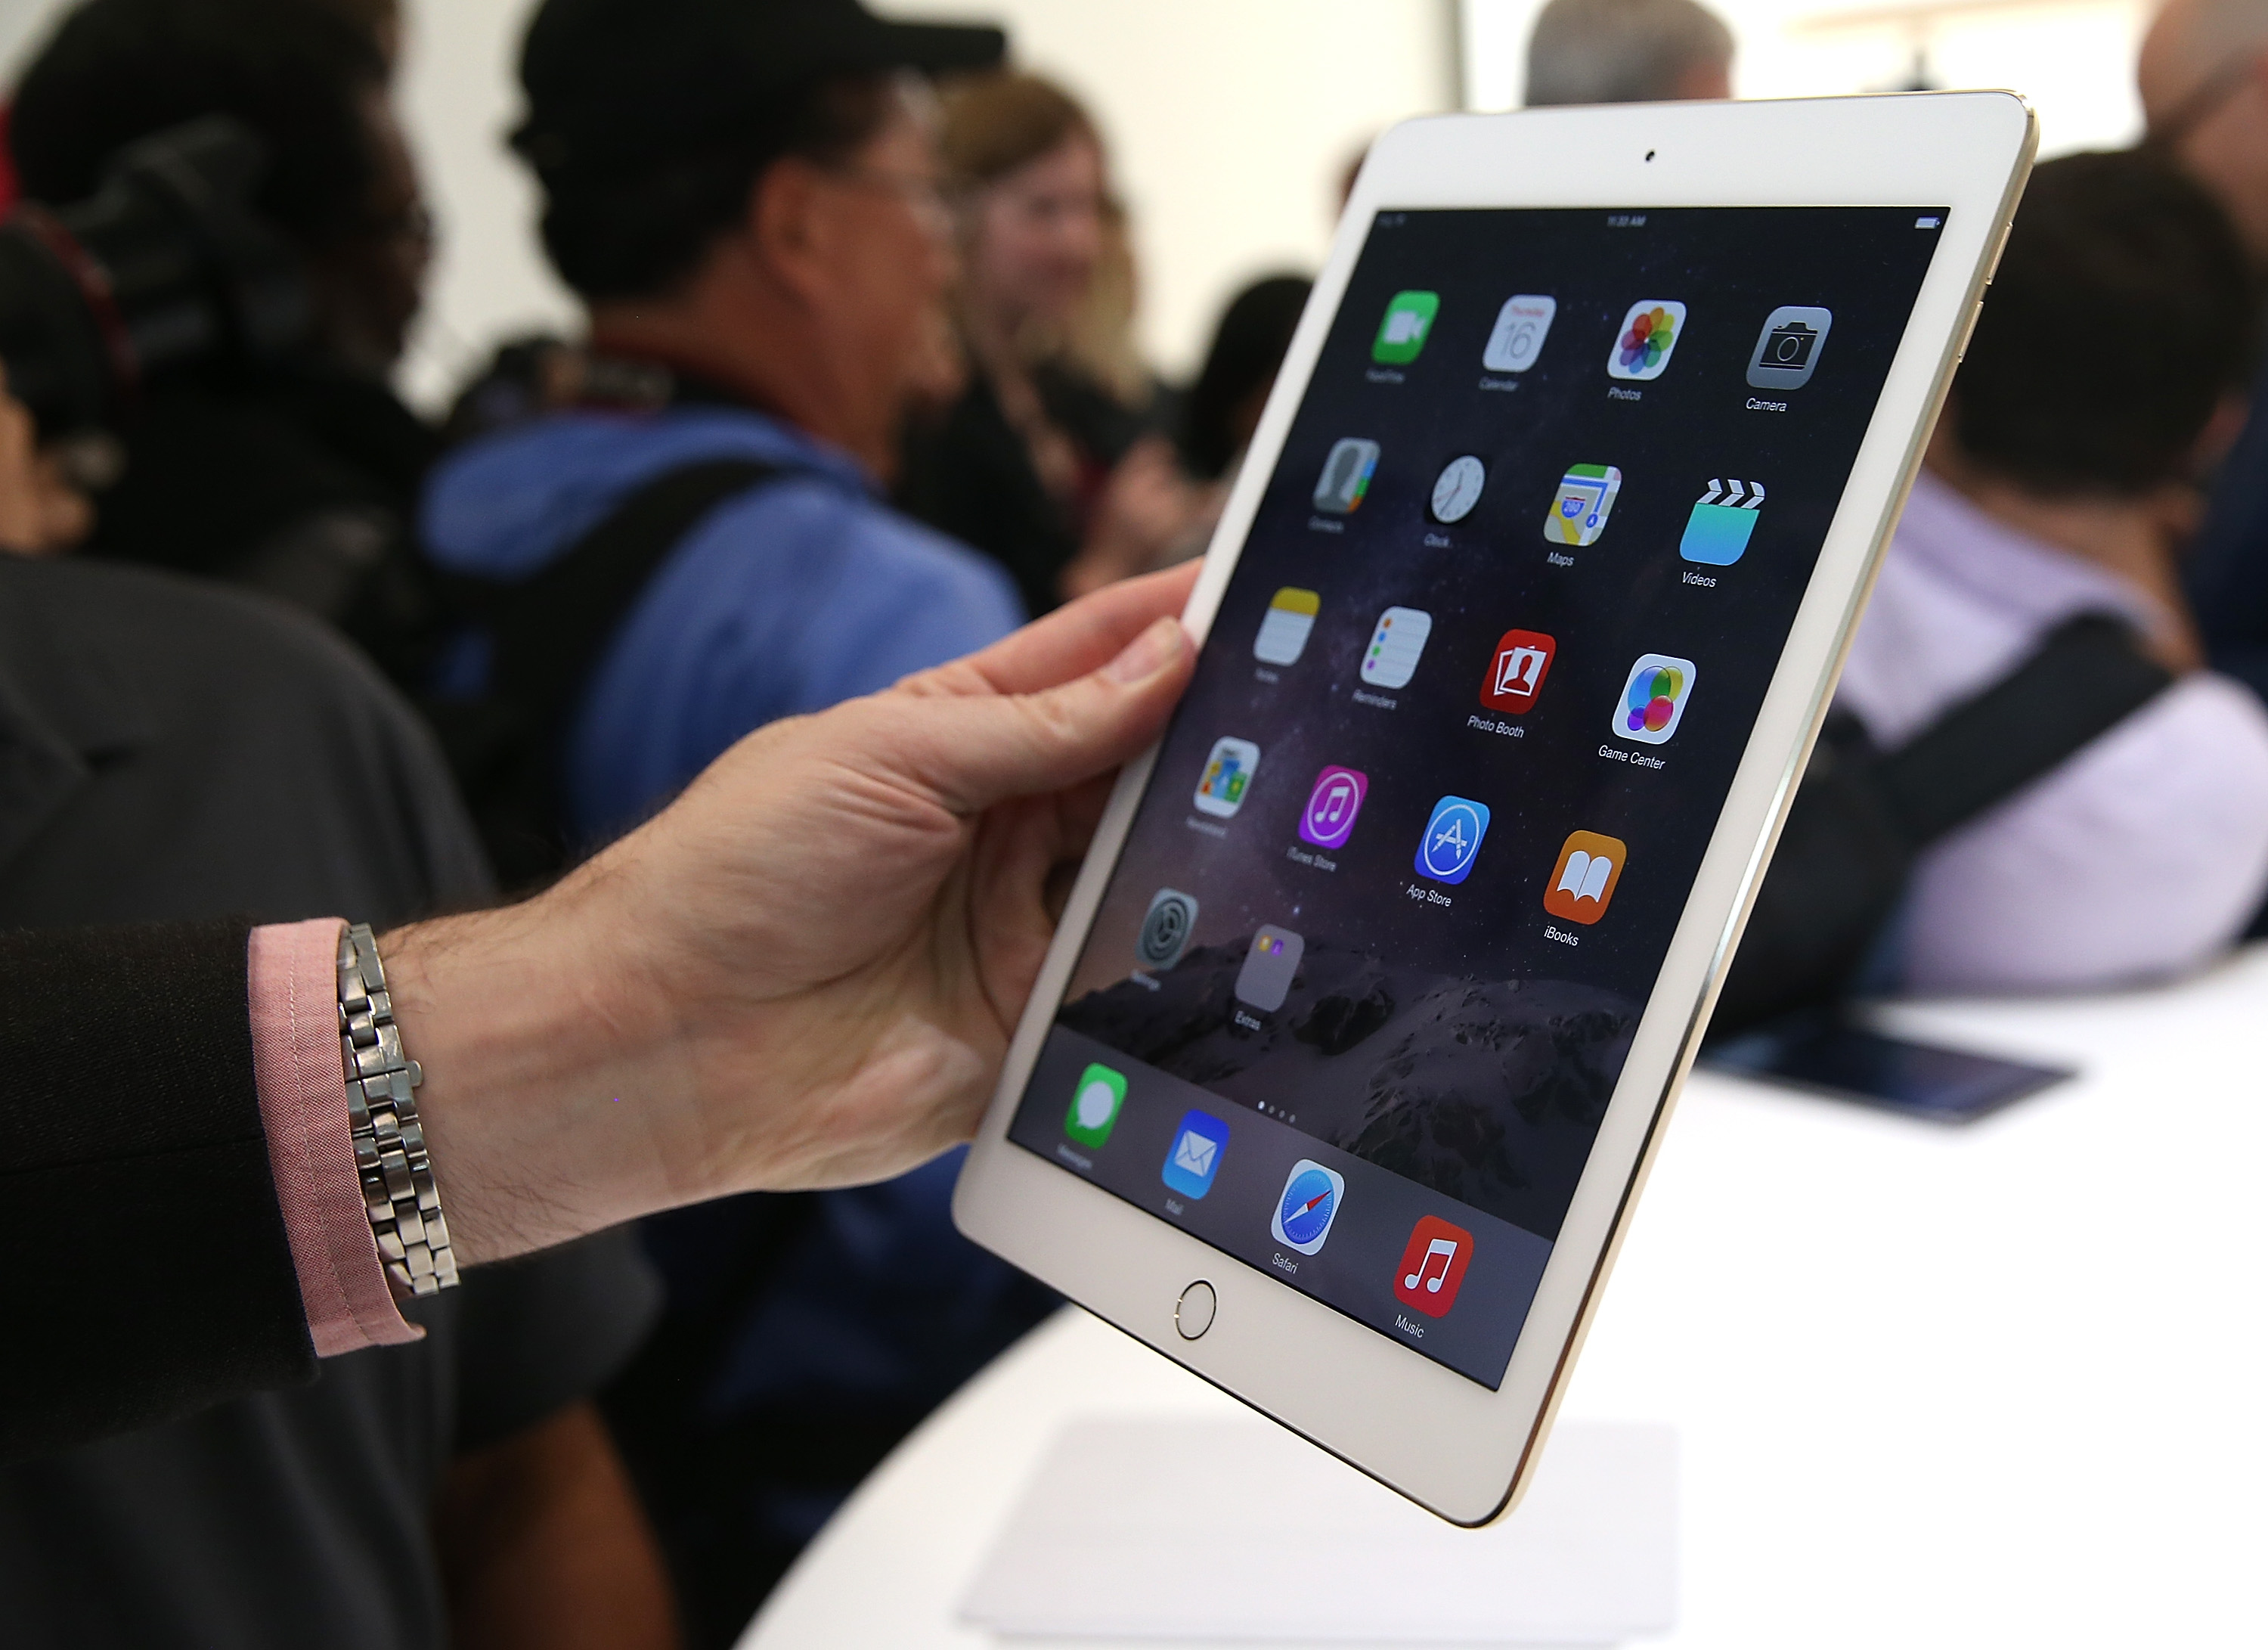 An attendee inspects new iPad Air 2 during an Apple special event on October 16, 2014 in Cupertino, California. (Justin Sullivan&mdash;Getty Images)